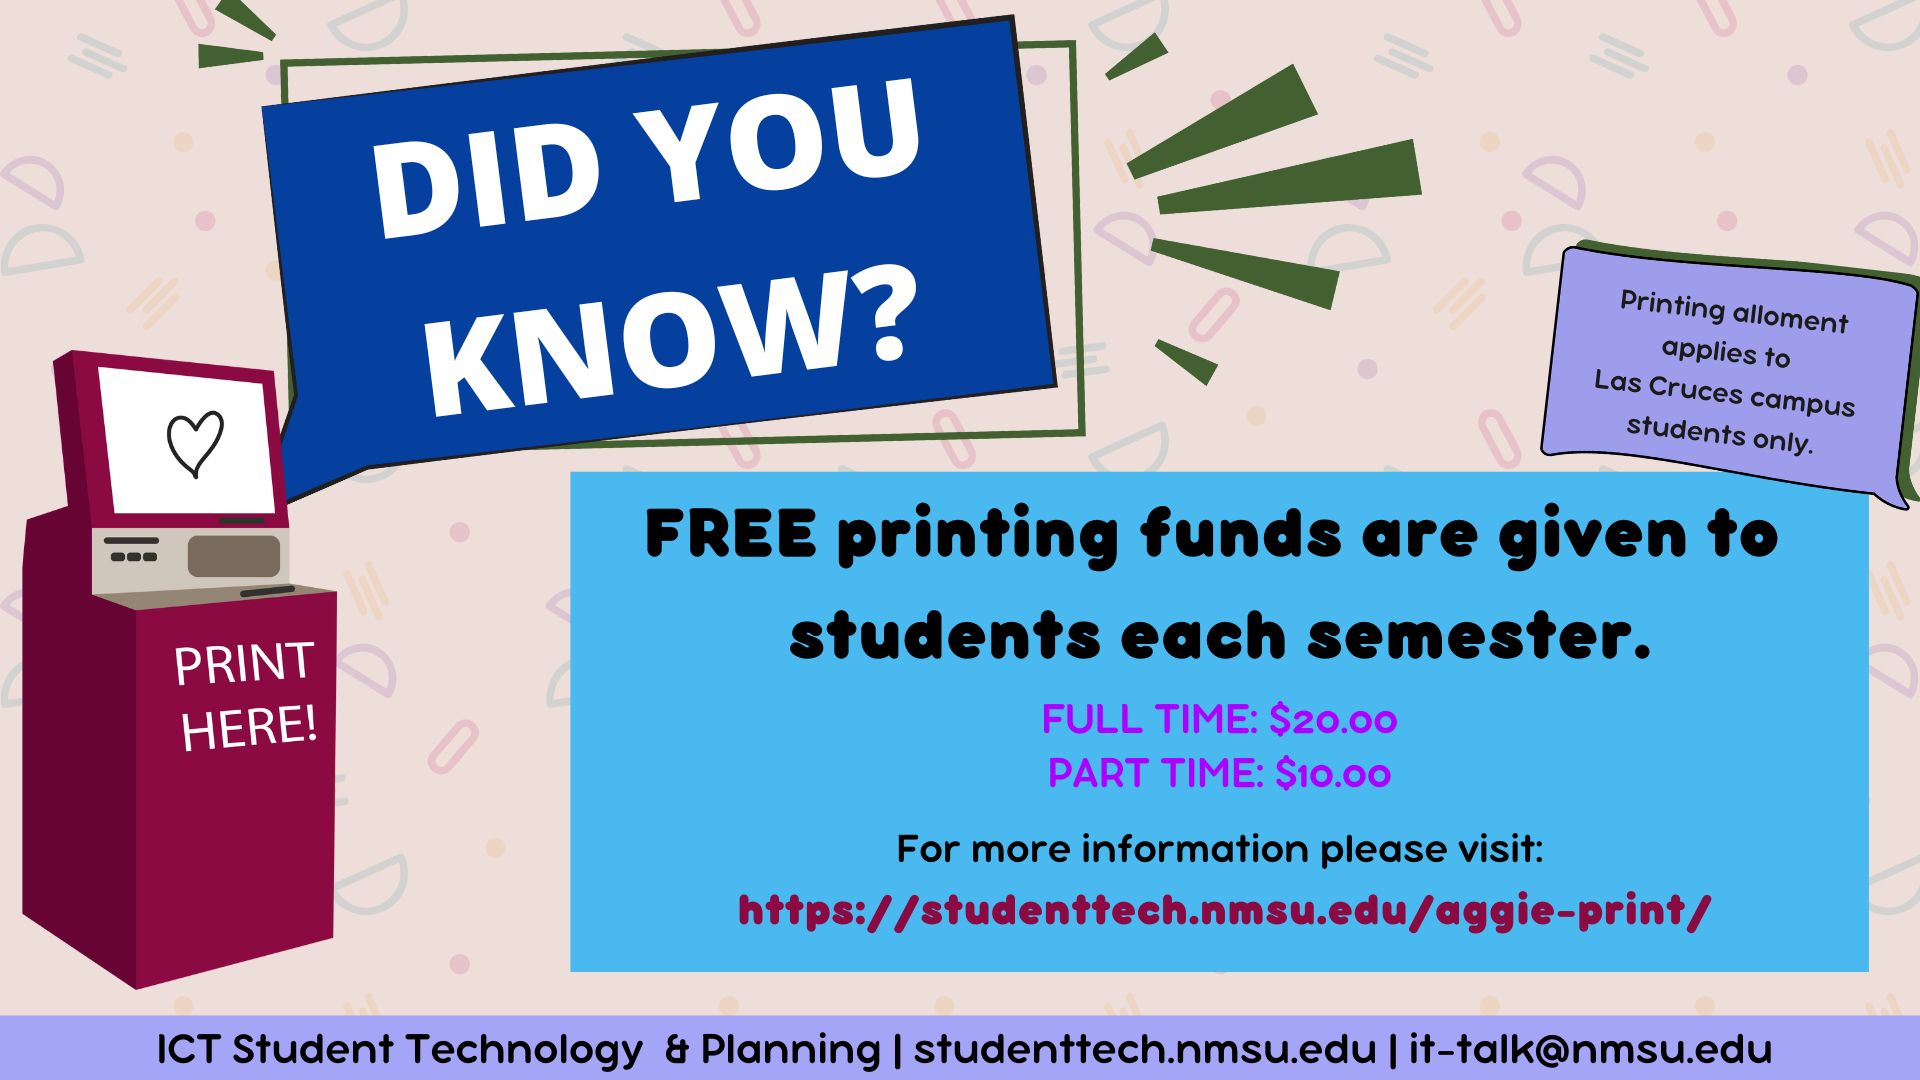 Free printing funds are given to students each semester. For more info, visit studenttech.nmsu.edu/aggie-print.